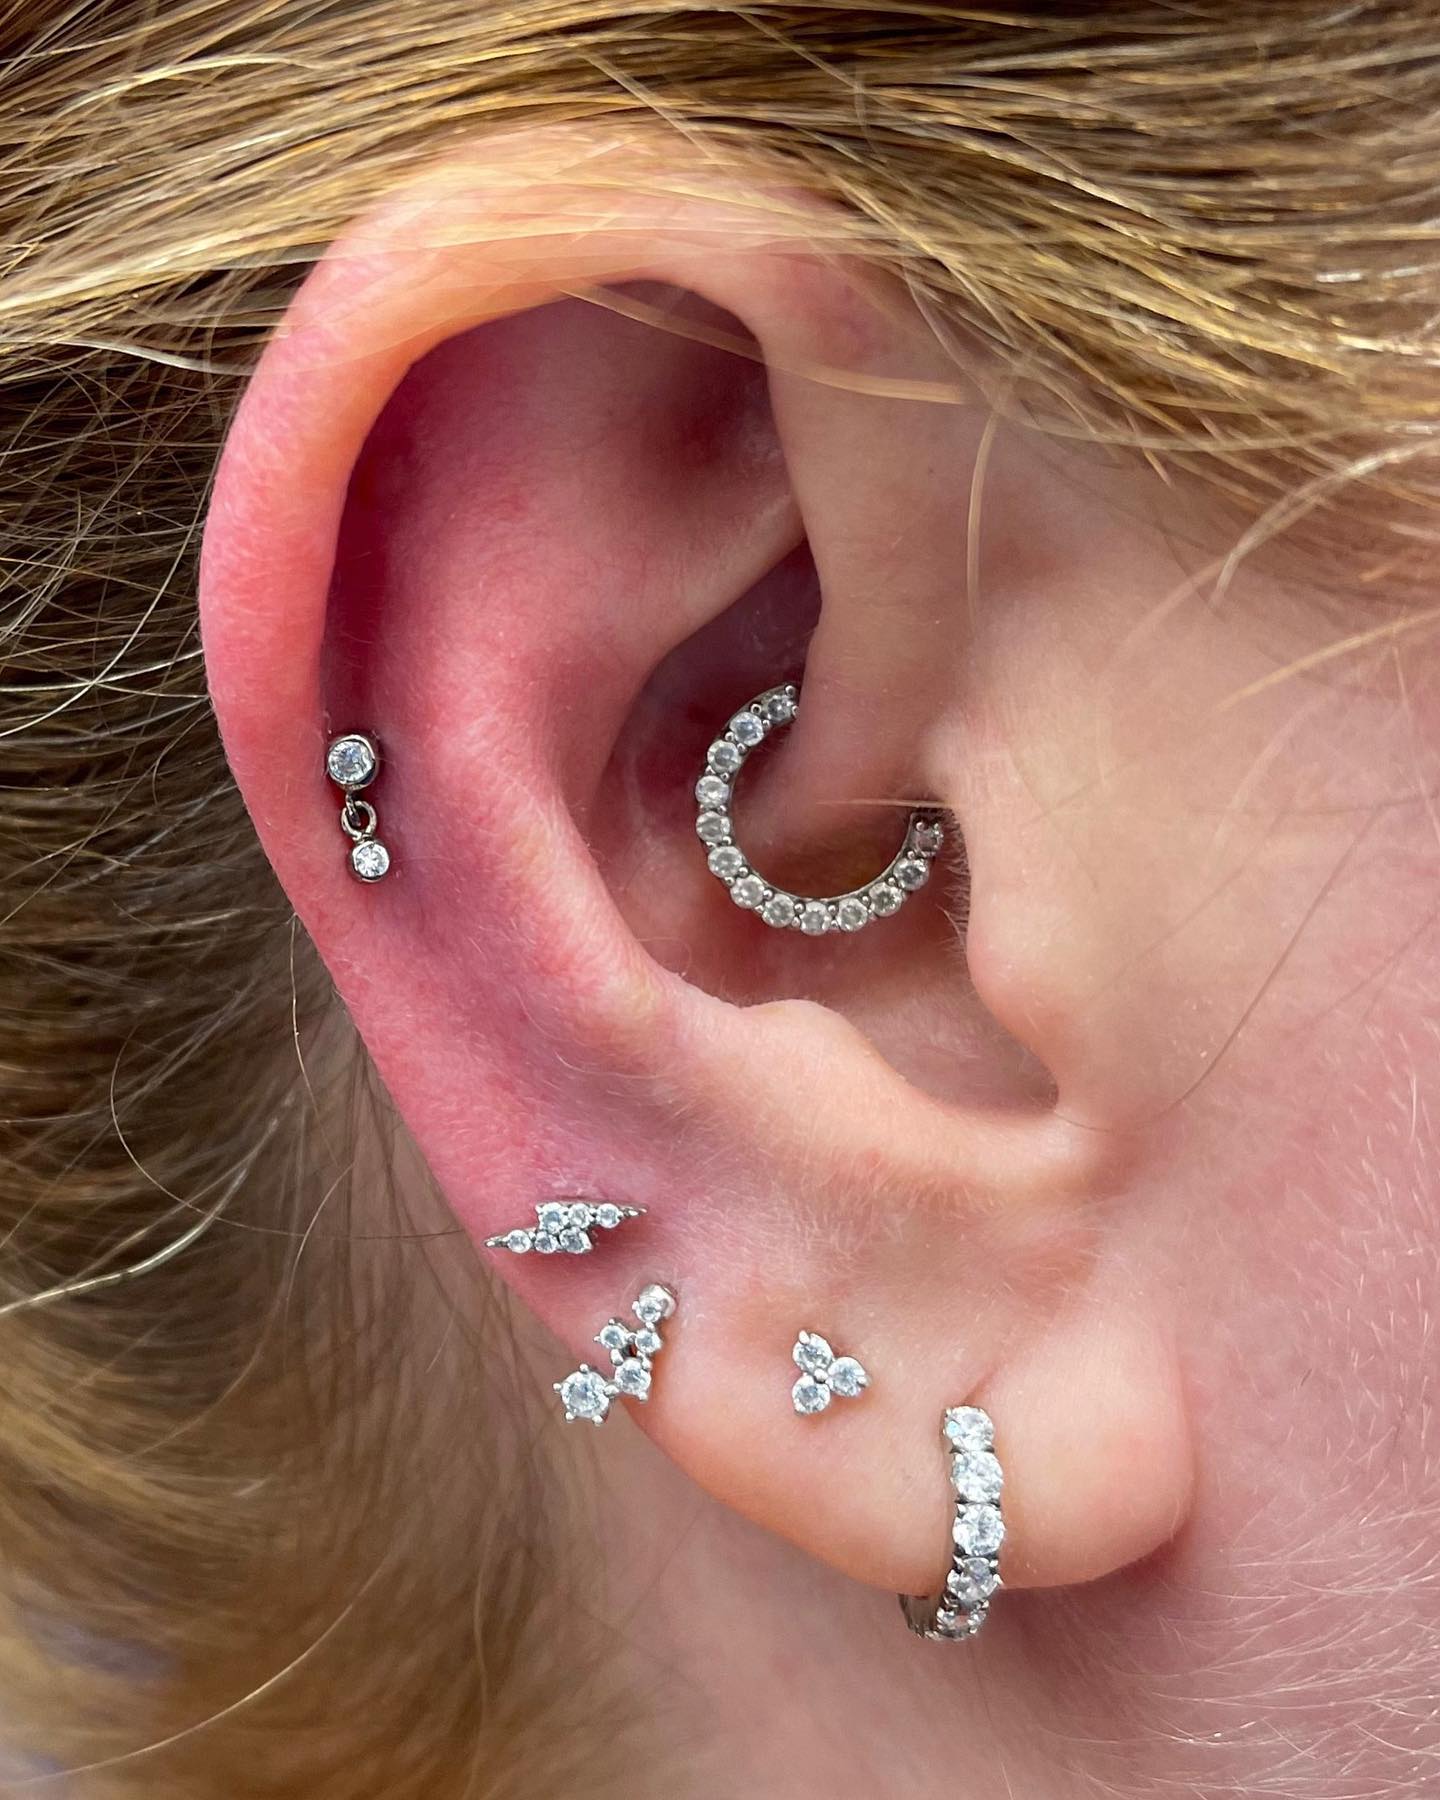 Fresh helix using this gorgeous little hanging crystal gem from Laura Bond for Sharon 🩷 Thank you so much for letting me add to your stunning collection! 

If you would like something similar, please send me a direct message 🫶🏻

Pierced at Studio XIII 🌿 